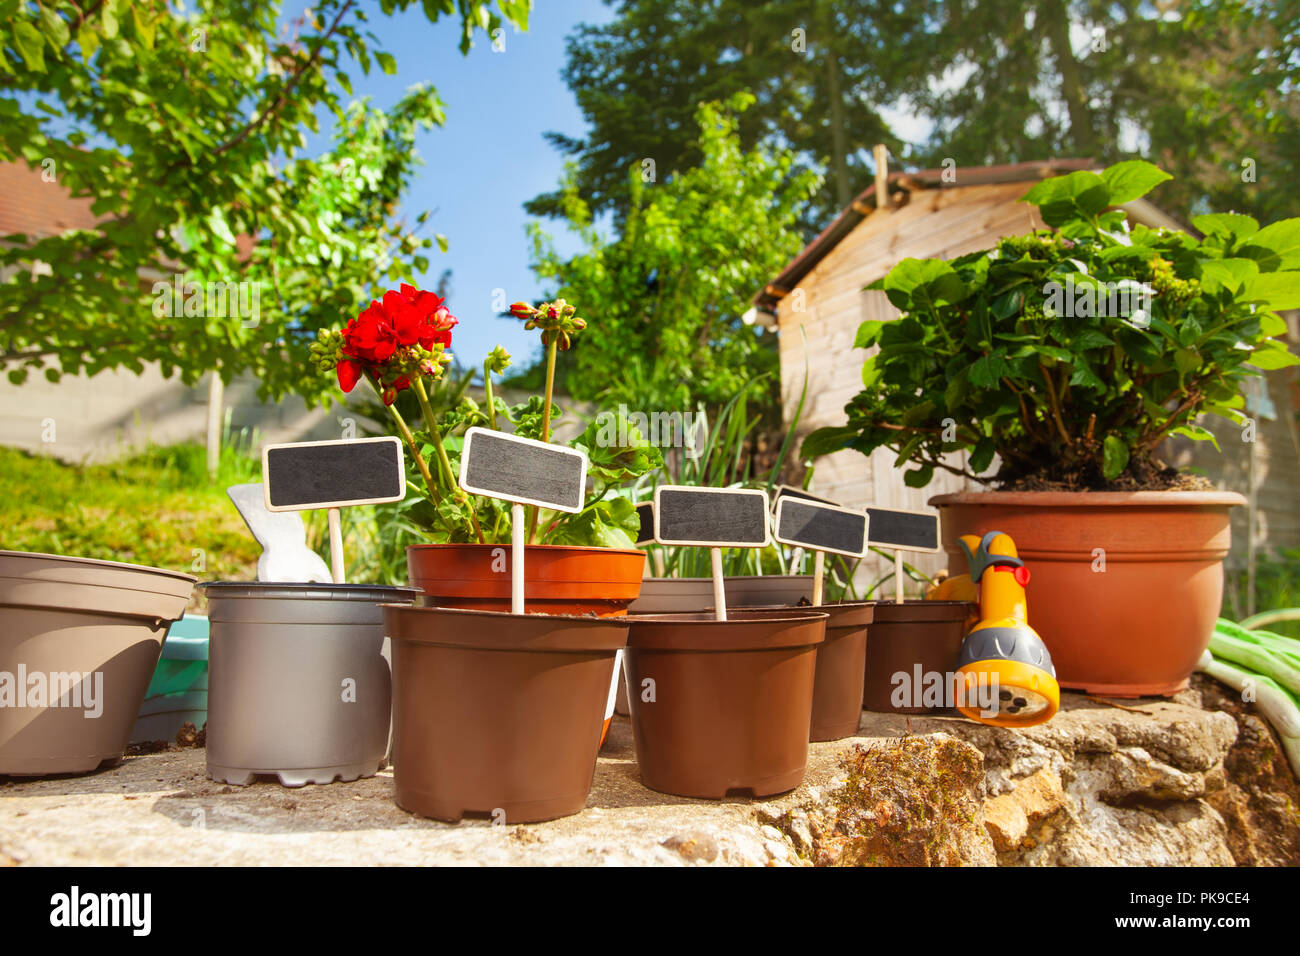 Flower pots with wooden labels in the garden Stock Photo